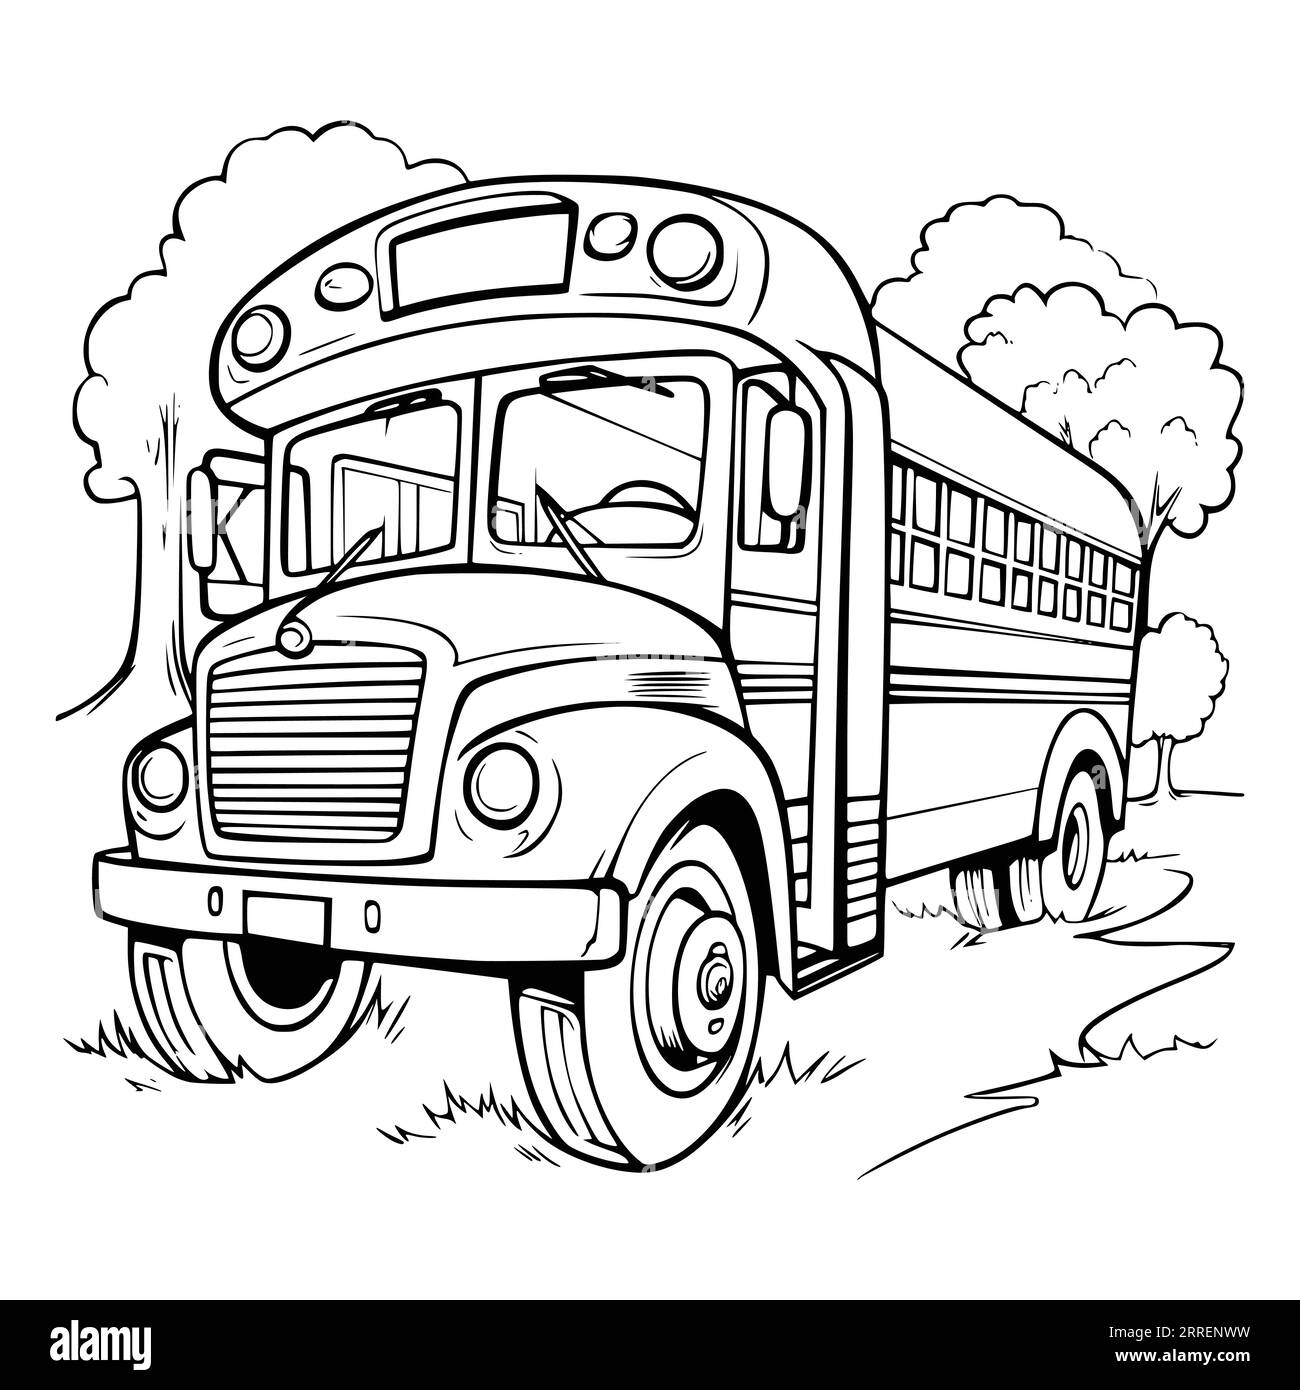 School Bus Coloring Page for Kids Stock Vector